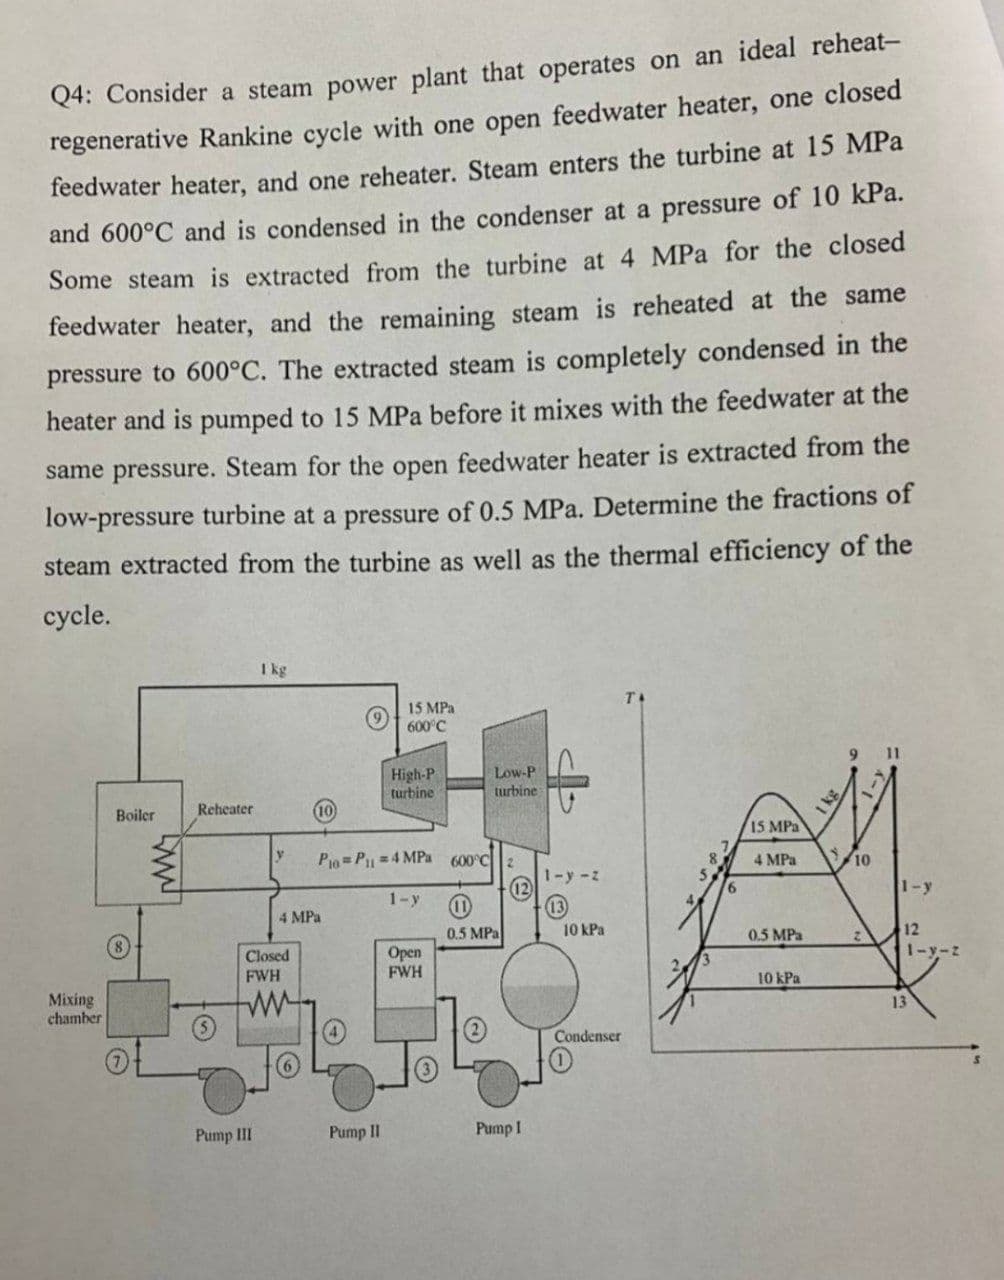 Q4: Consider a steam power plant that operates on an ideal reheat-
regenerative Rankine cycle with one open feedwater heater, one closed
feedwater heater, and one reheater. Steam enters the turbine at 15 MPa
and 600°C and is condensed in the condenser at a pressure of 10 kPa.
Some steam is extracted from the turbine at 4 MPa for the closed
feedwater heater, and the remaining steam is reheated at the same
pressure to 600°C. The extracted steam is completely condensed in the
heater and is pumped to 15 MPa before it mixes with the feedwater at the
same pressure. Steam for the open feedwater heater is extracted from the
low-pressure turbine at a pressure of 0.5 MPa. Determine the fractions of
steam extracted from the turbine as well as the thermal efficiency of the
сycle.
I kg
15 MPa
600°C
9
11
Low-P
High-P
turbine
turbine
Boiler
Reheater
10
15 MPa
P P1 4 MPa 600°C
4 MPa
10
1-y-z
12
1-y
1-y
4 MPa
0.5 MPa
10 kPa
12
1-y-z
0.5 MPa
Орen
FWH
Closed
FWH
10kPa
Mixing
chamber
13
(5)
Condenser
Pump III
Pump II
Pump I
